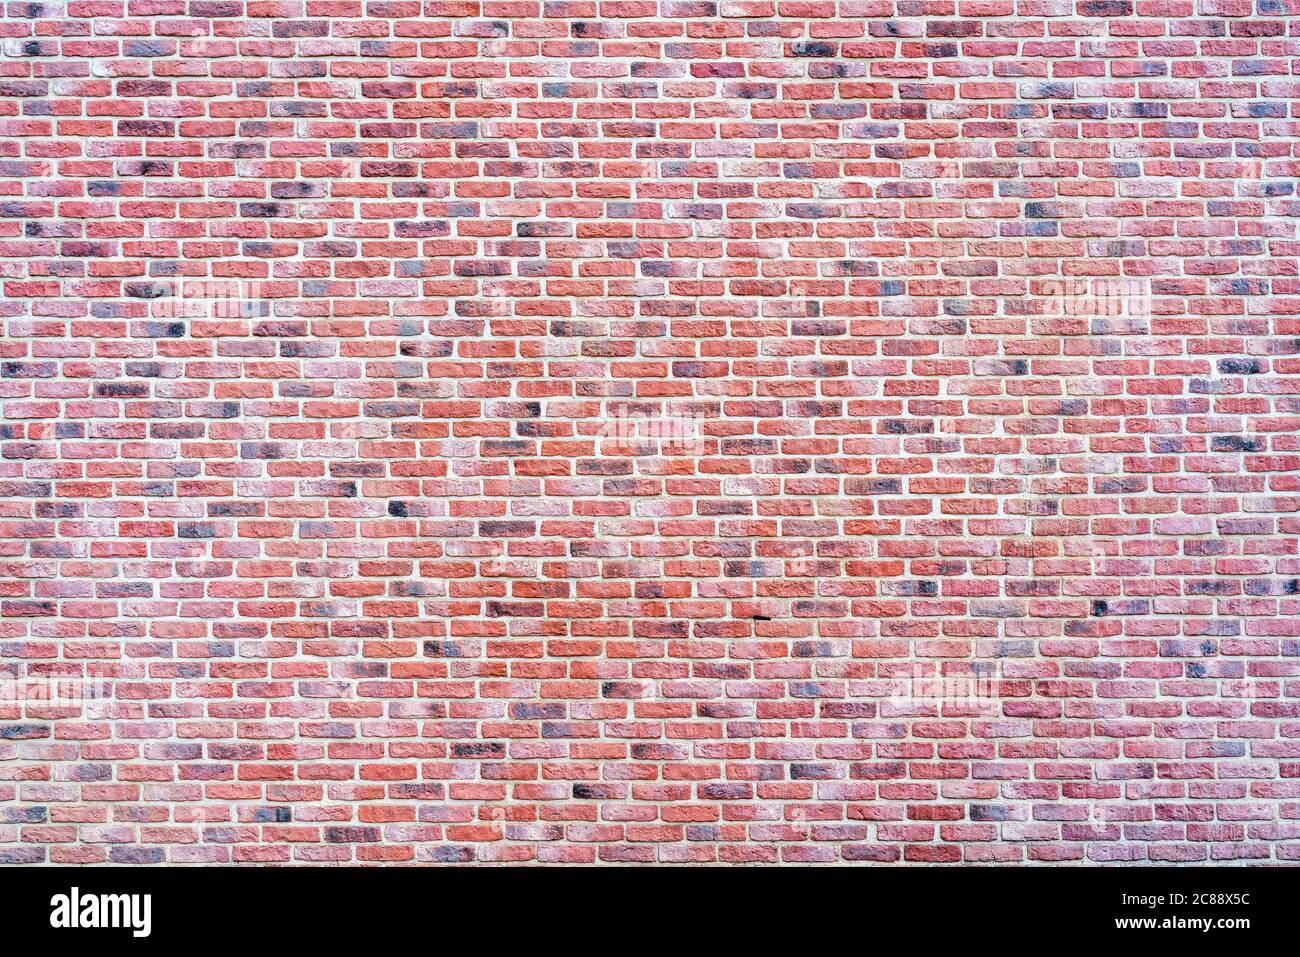 Old vintage red brick wall textured background. Stock Photo